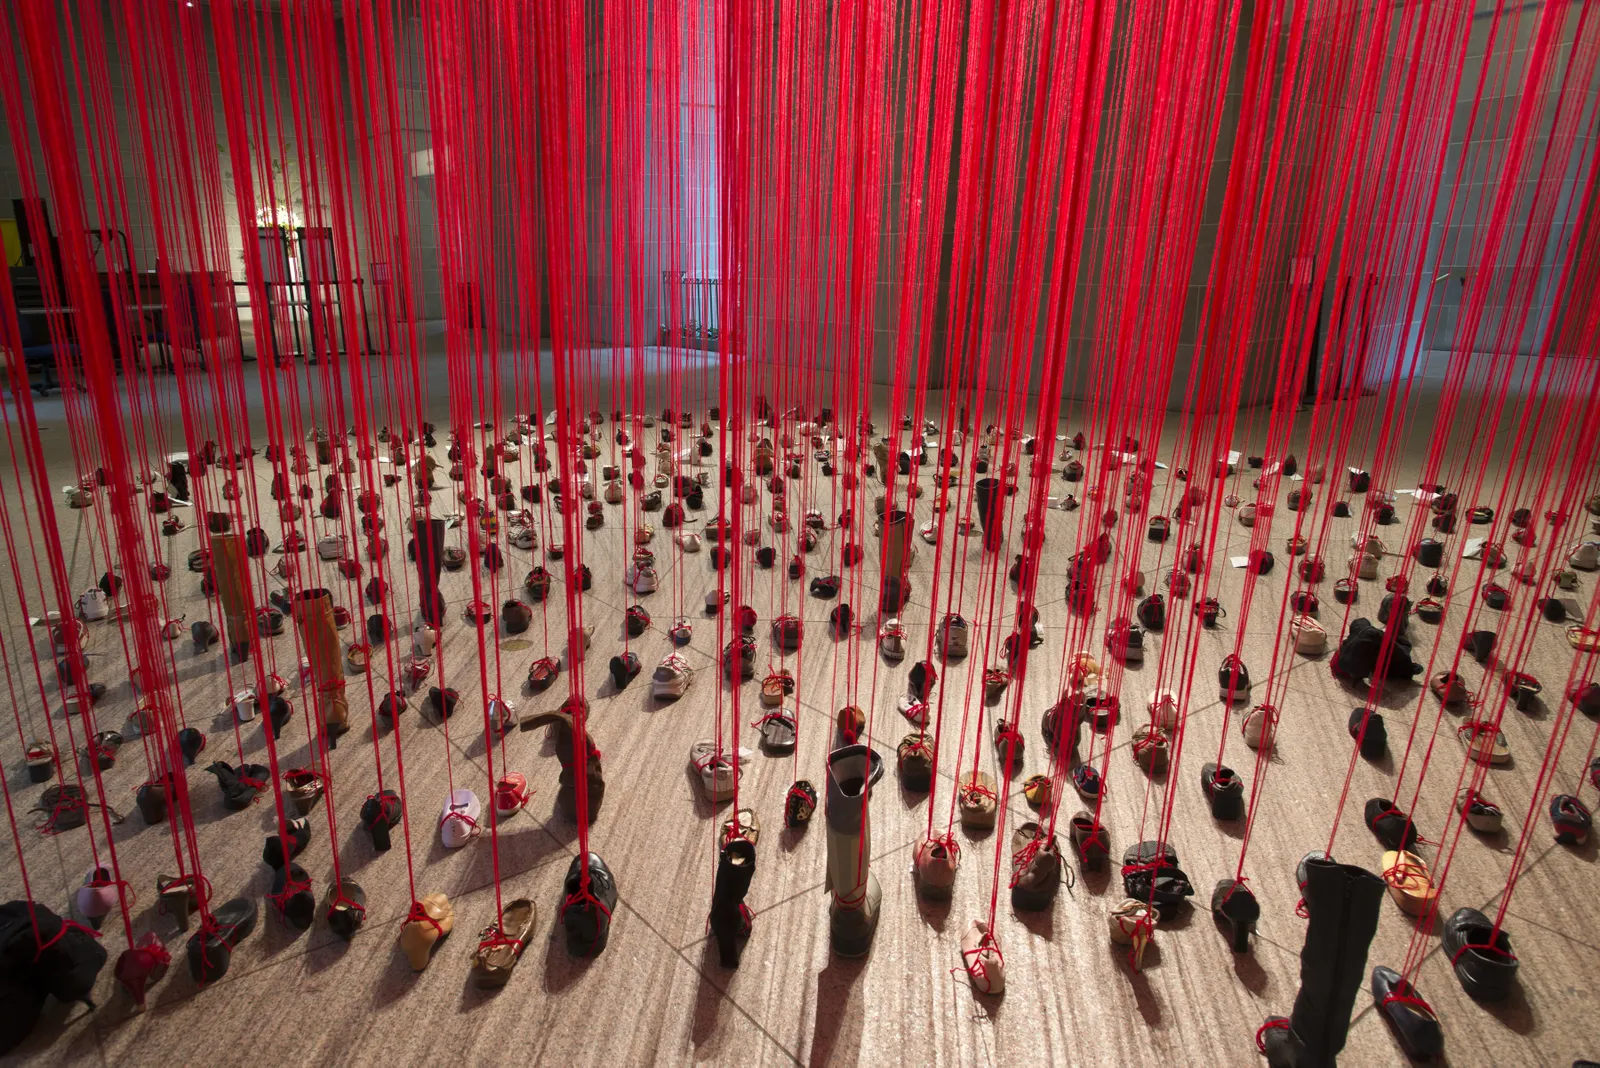 What's In a Shoe? Artist Chiharu Shiota Investigates | At the Smithsonian| Smithsonian Magazine